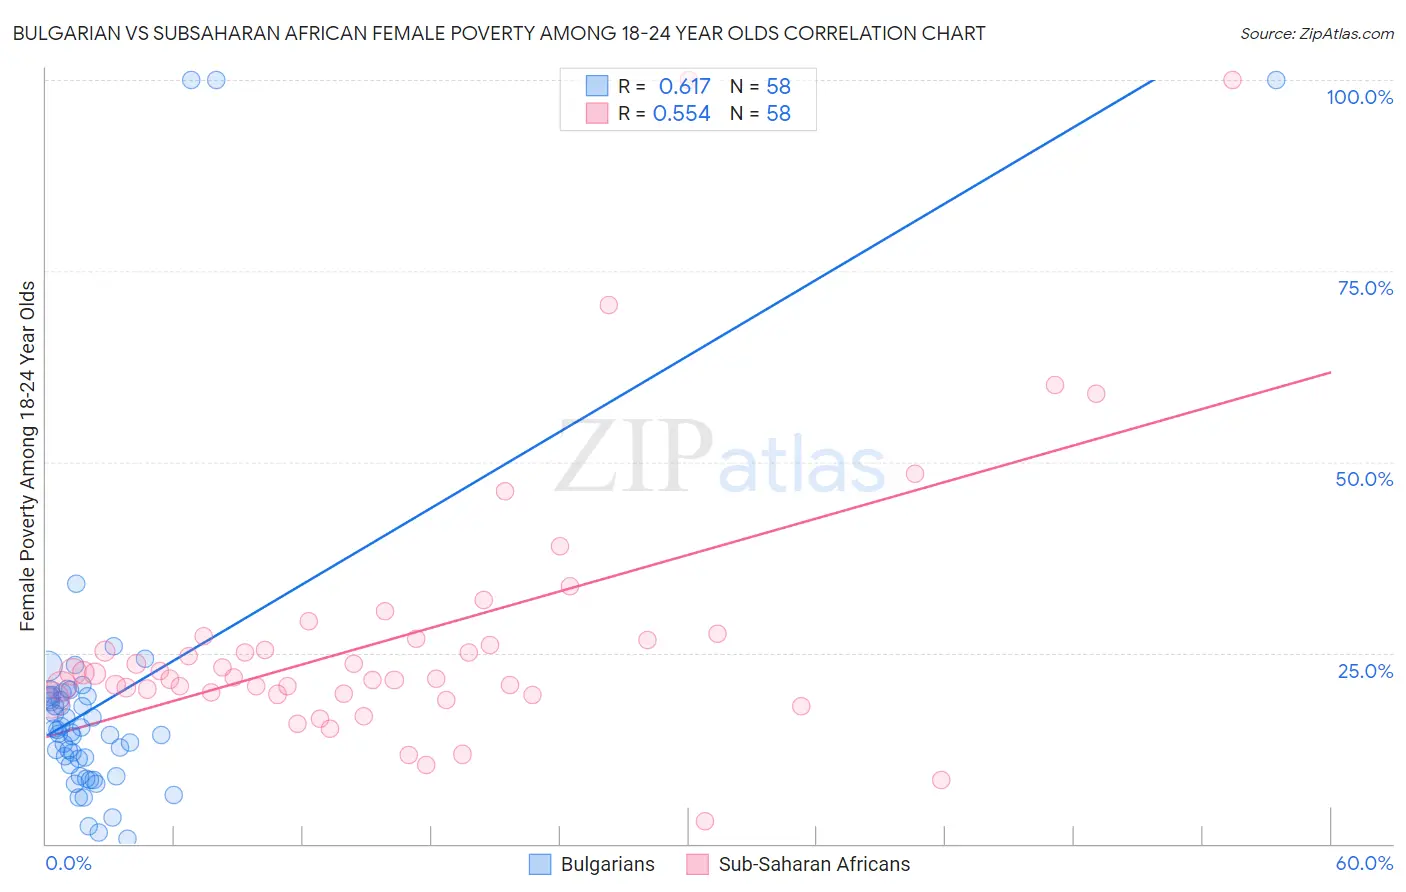 Bulgarian vs Subsaharan African Female Poverty Among 18-24 Year Olds